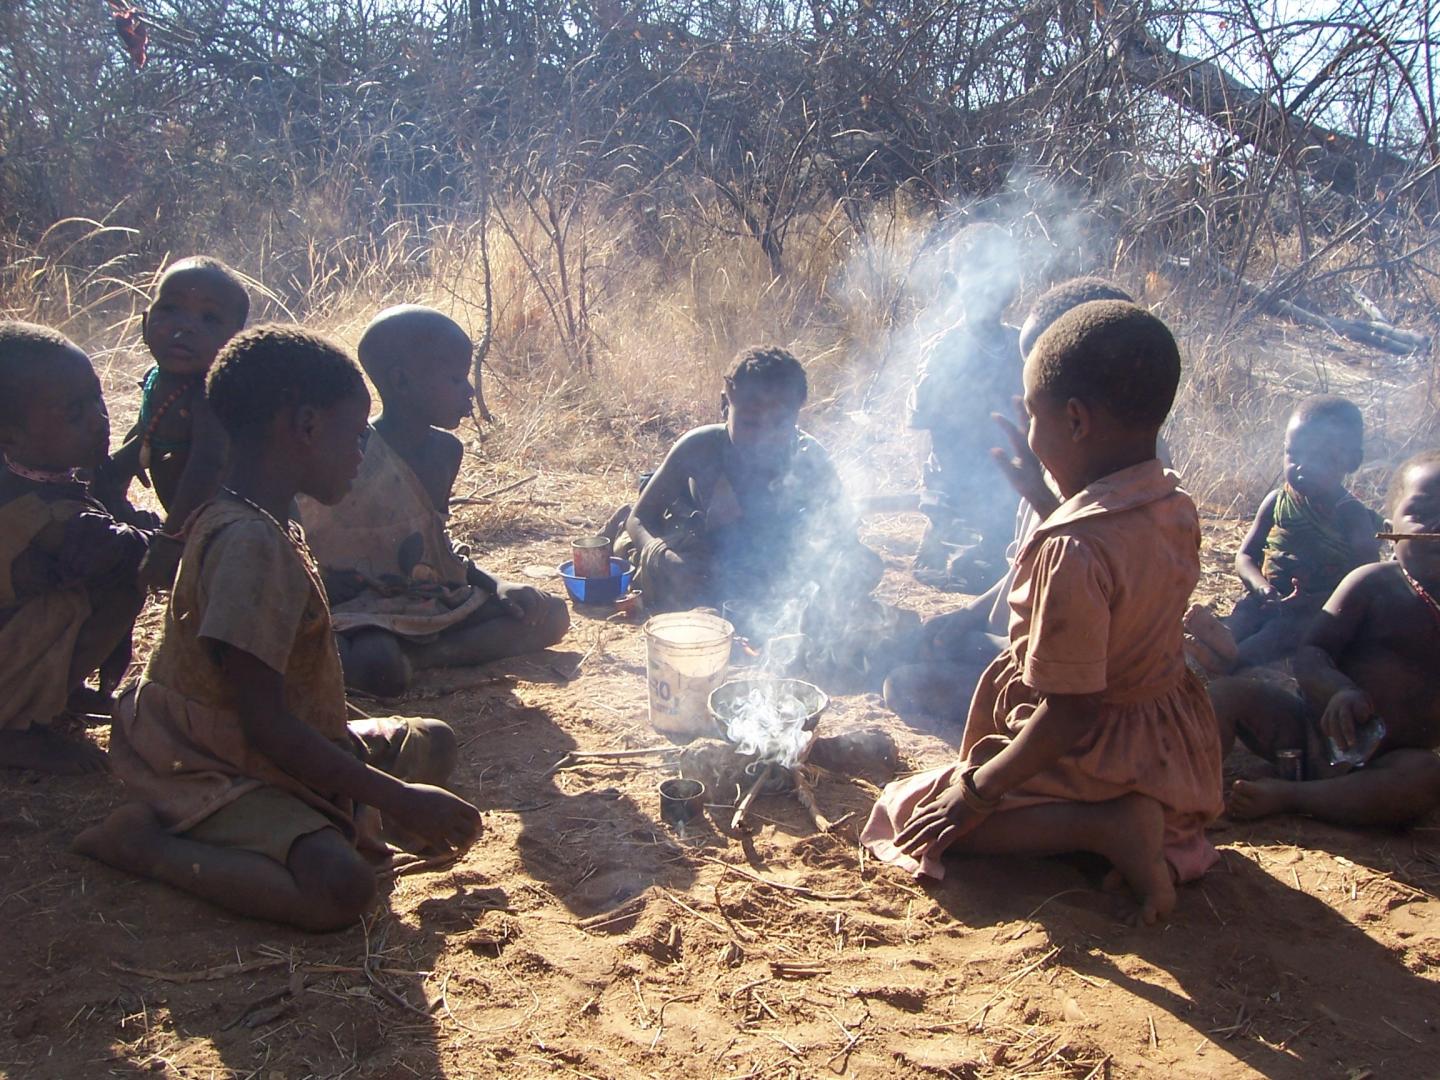 Hadza Children Engaged in Cooking Play